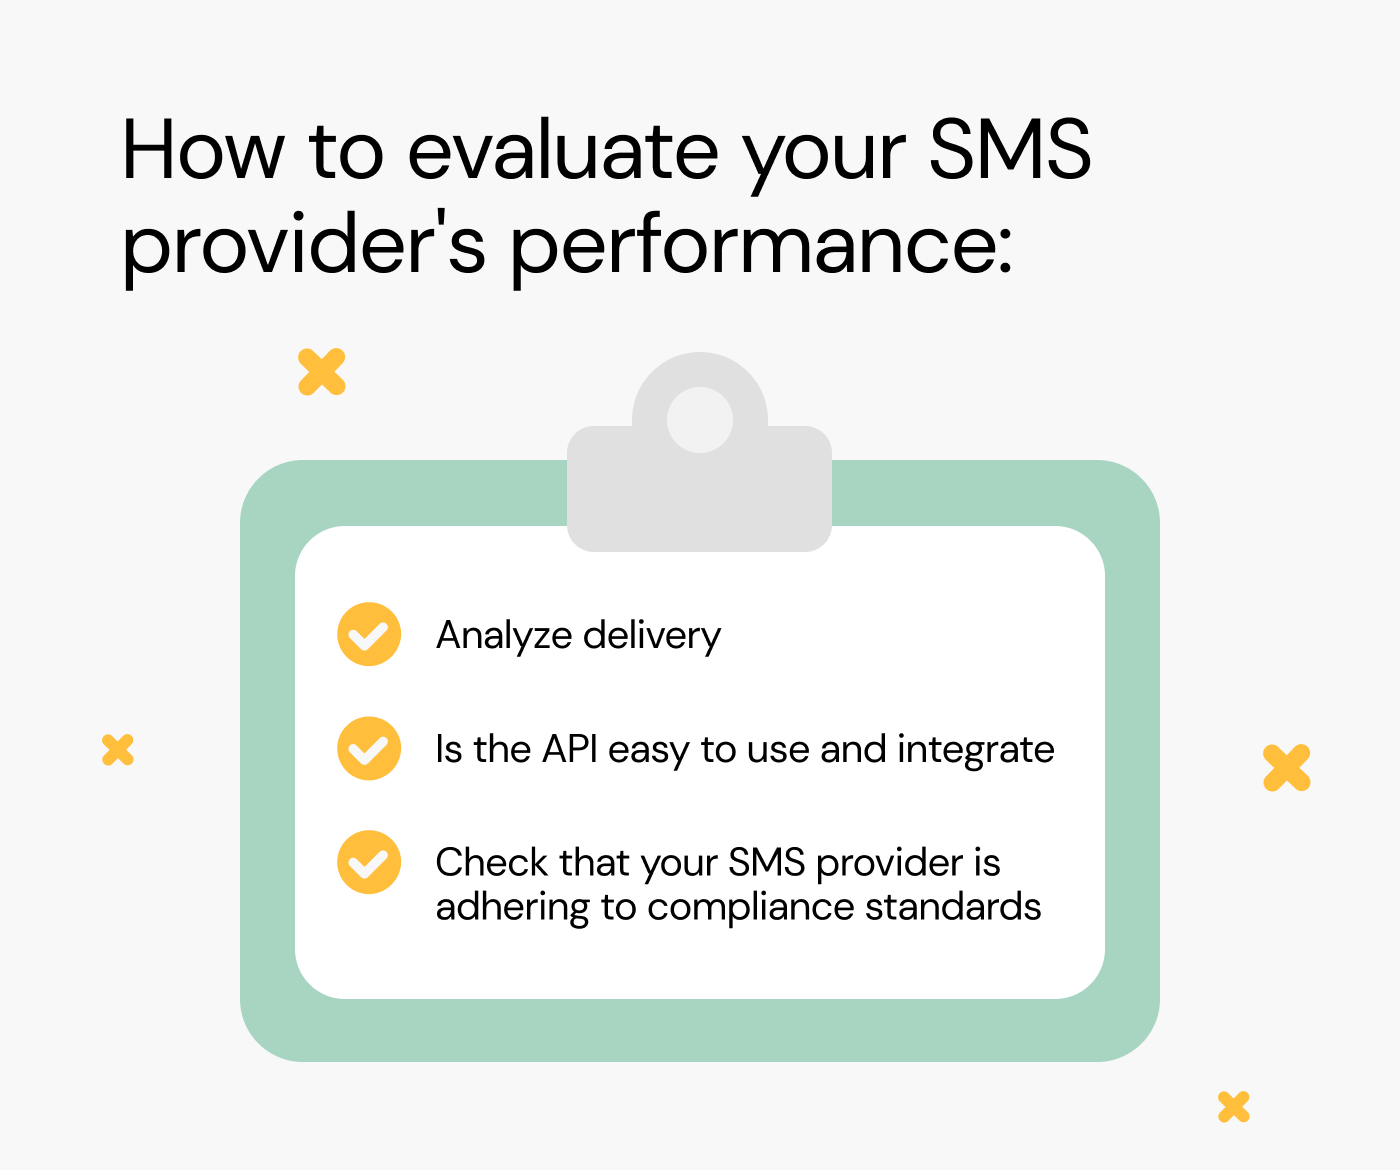 Checklist of requirements for choosing the right SMS provider